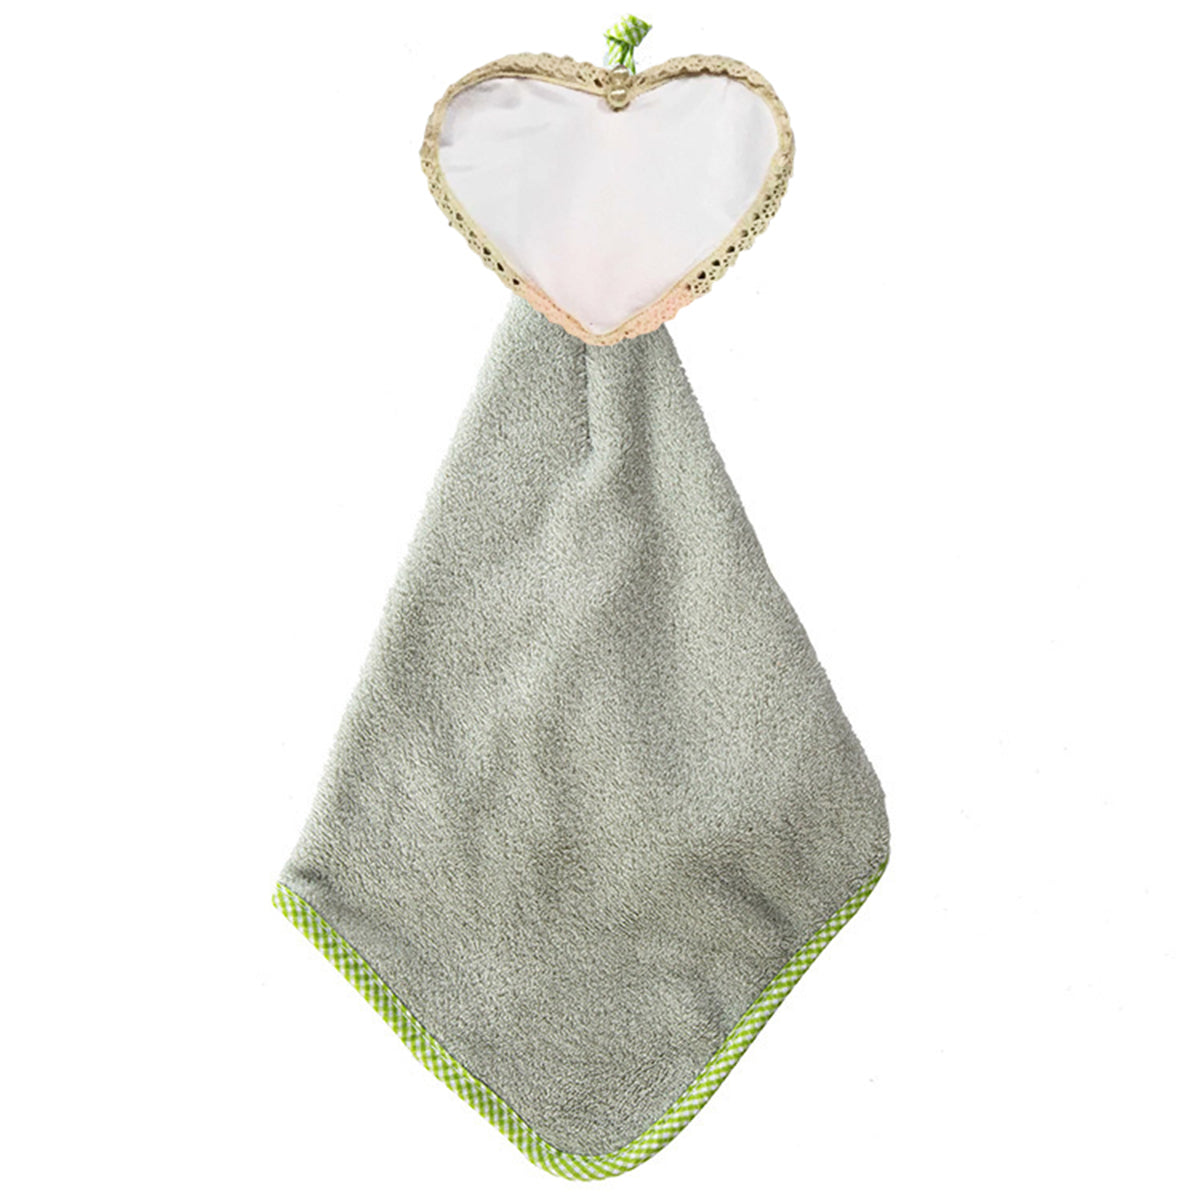 TW2 Personalised Hand Towel Heart Printing For Kid Microfiber Hand Dry Towel Home Decor (Green)